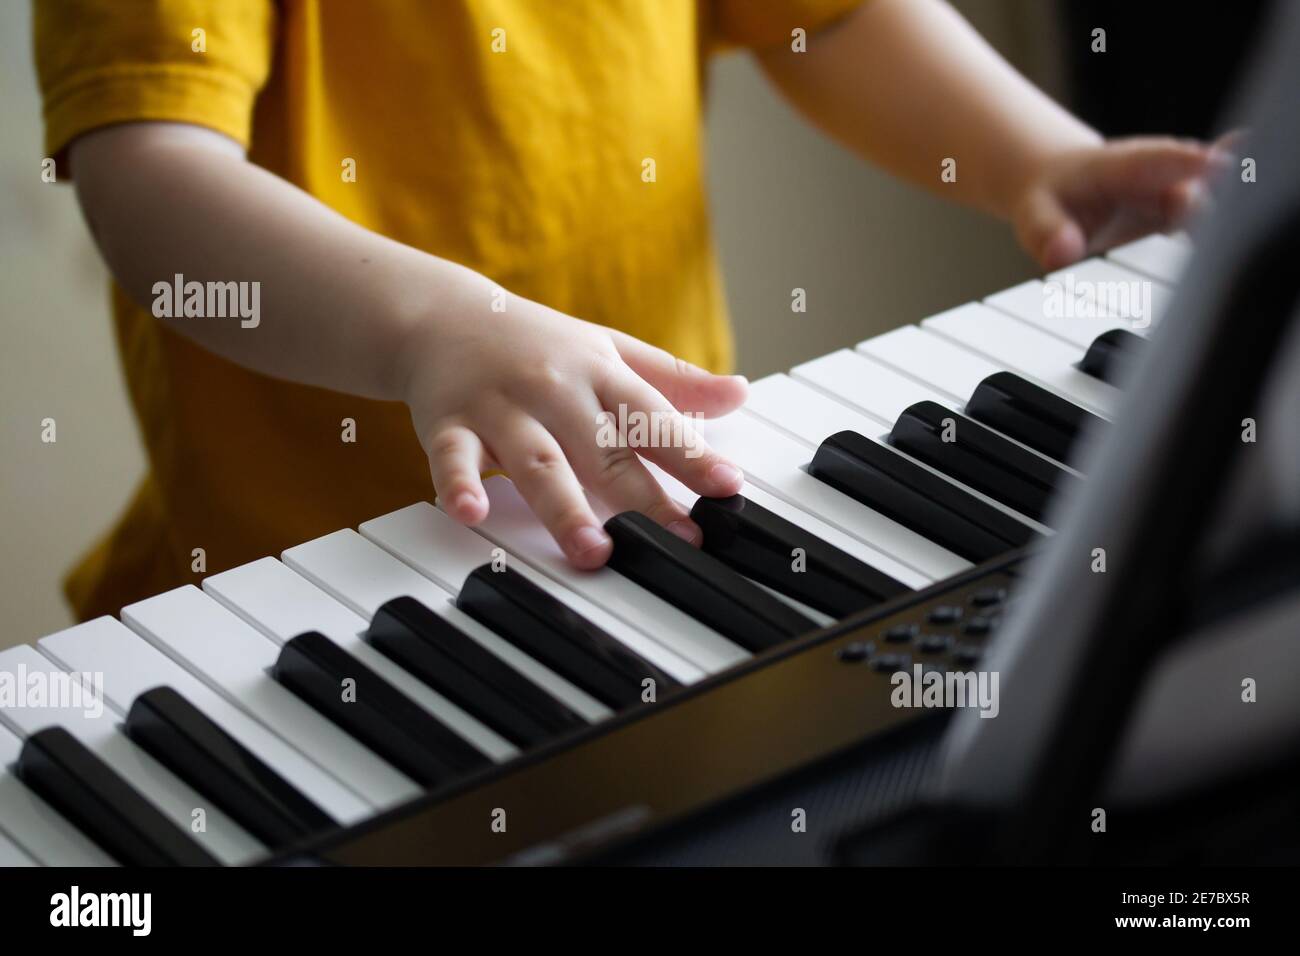 Child's hands on the synthesizer's keyboard. Toddler learning how to play piano. Small fingers pressing on the keys closeup. Early development and edu Stock Photo